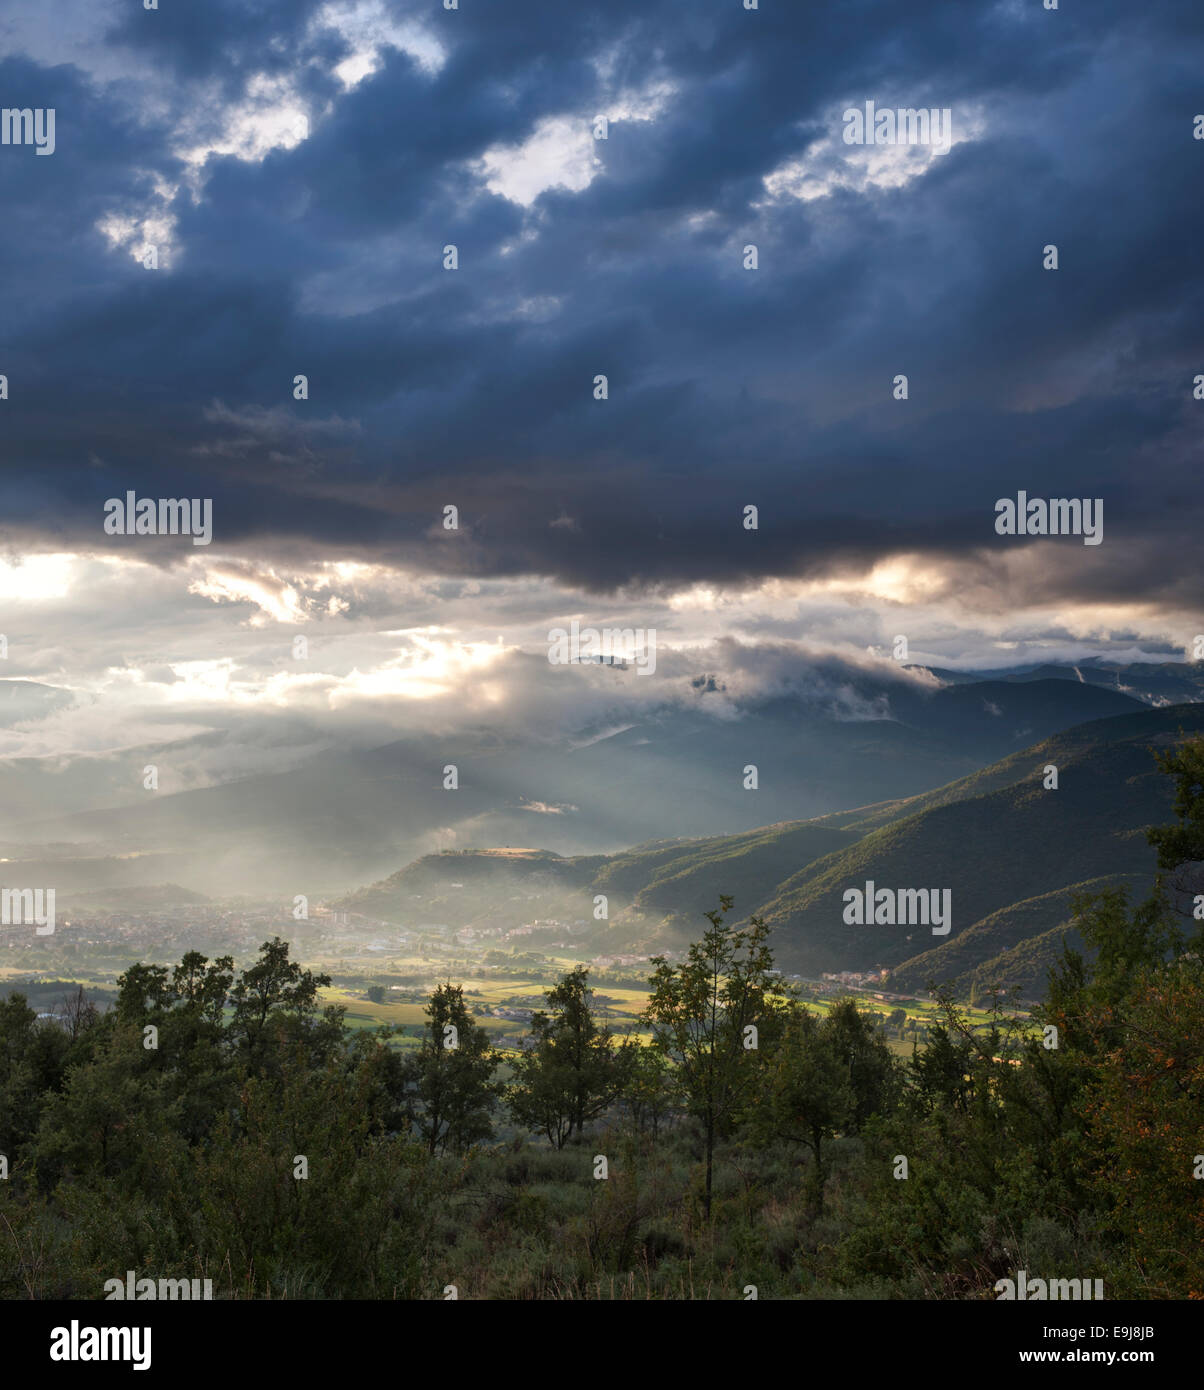 View from the village of Ortedo towards the town of La Seu d'Urgell, in the Pyrenees of Catalonia, Spain, after a thunderstorm Stock Photo